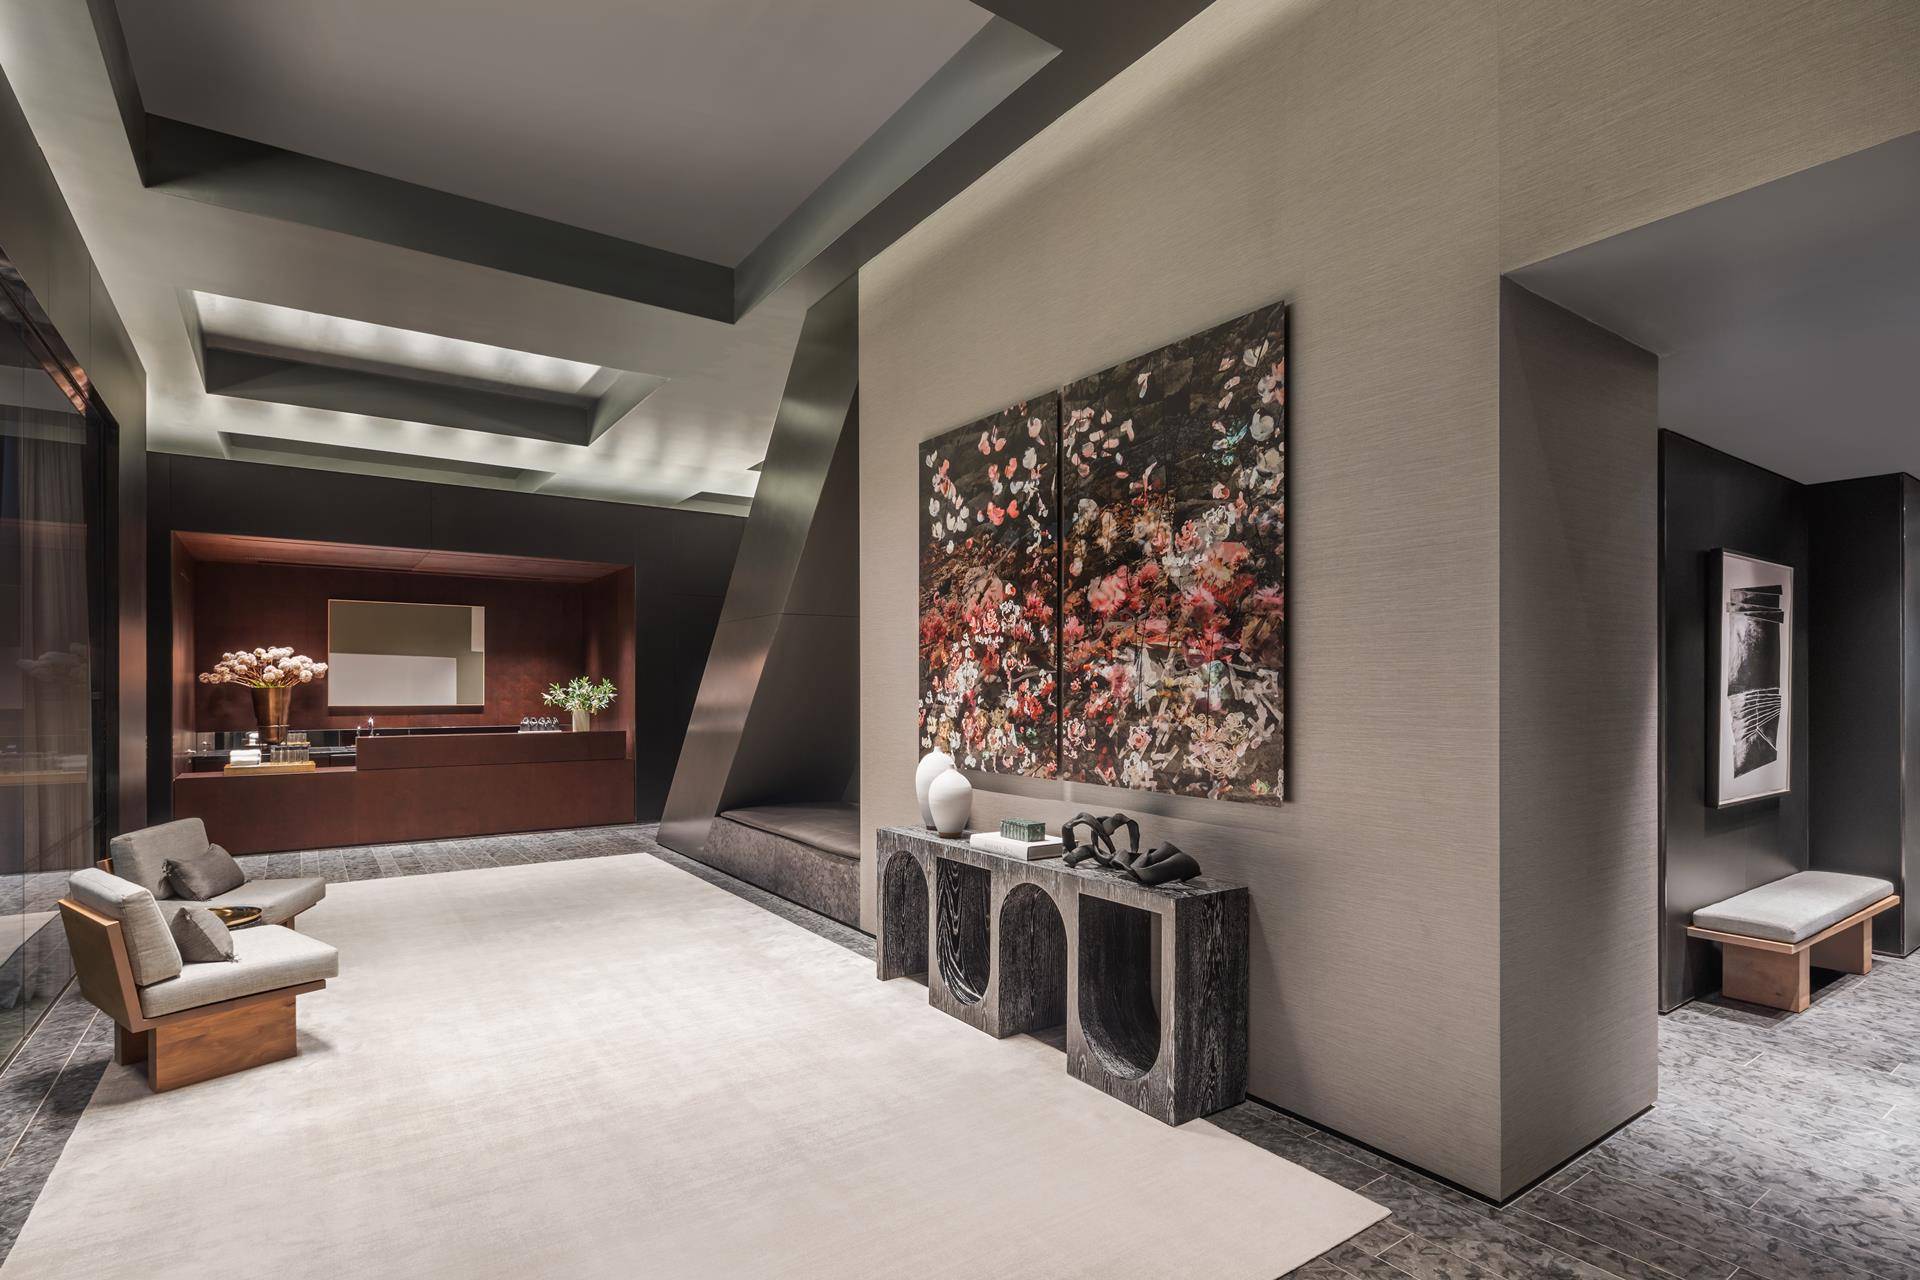 Balancing grand scale living with the intimate feeling of home, Residence 57B at 53 West 53 comprises 3, 273 square feet, offering three bedrooms, three and a half bathrooms, and ...